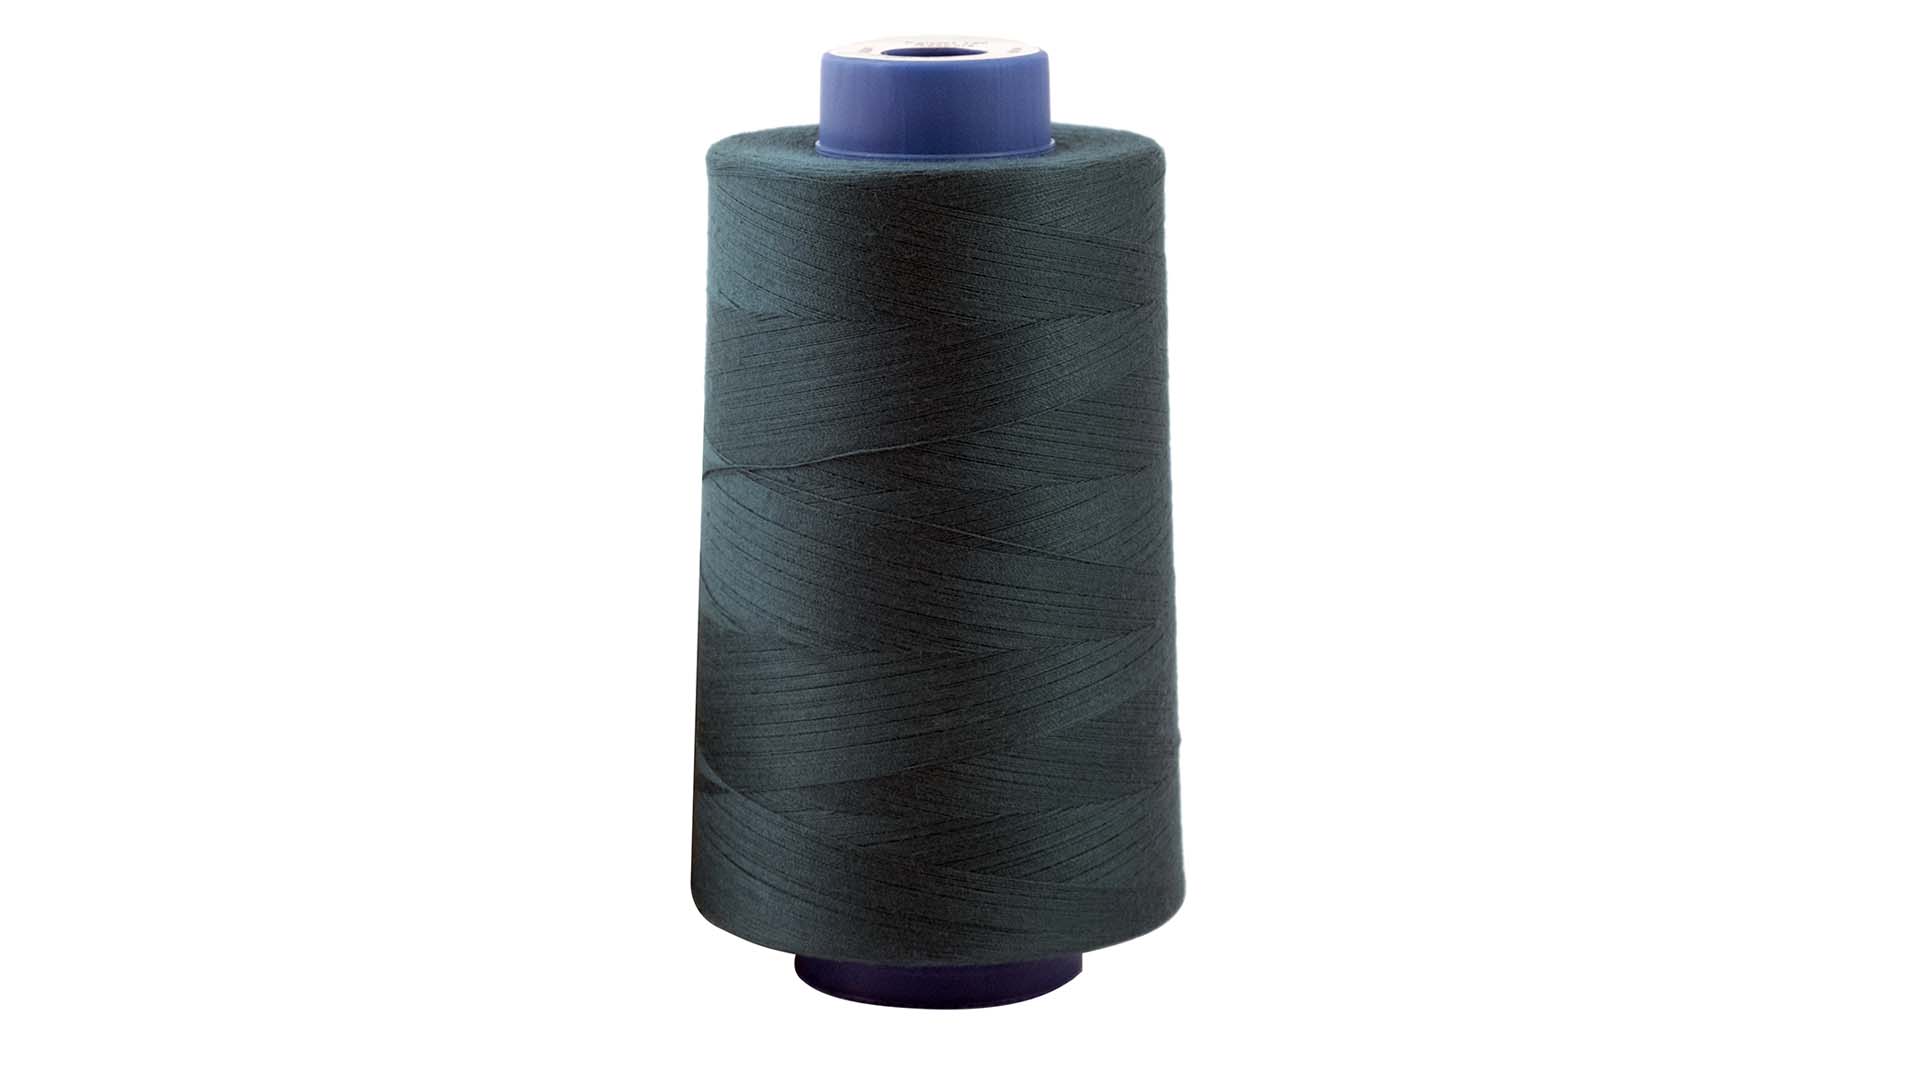 Textiles are more comfortable and sustainable with new Durak Tekstil lyocell threads